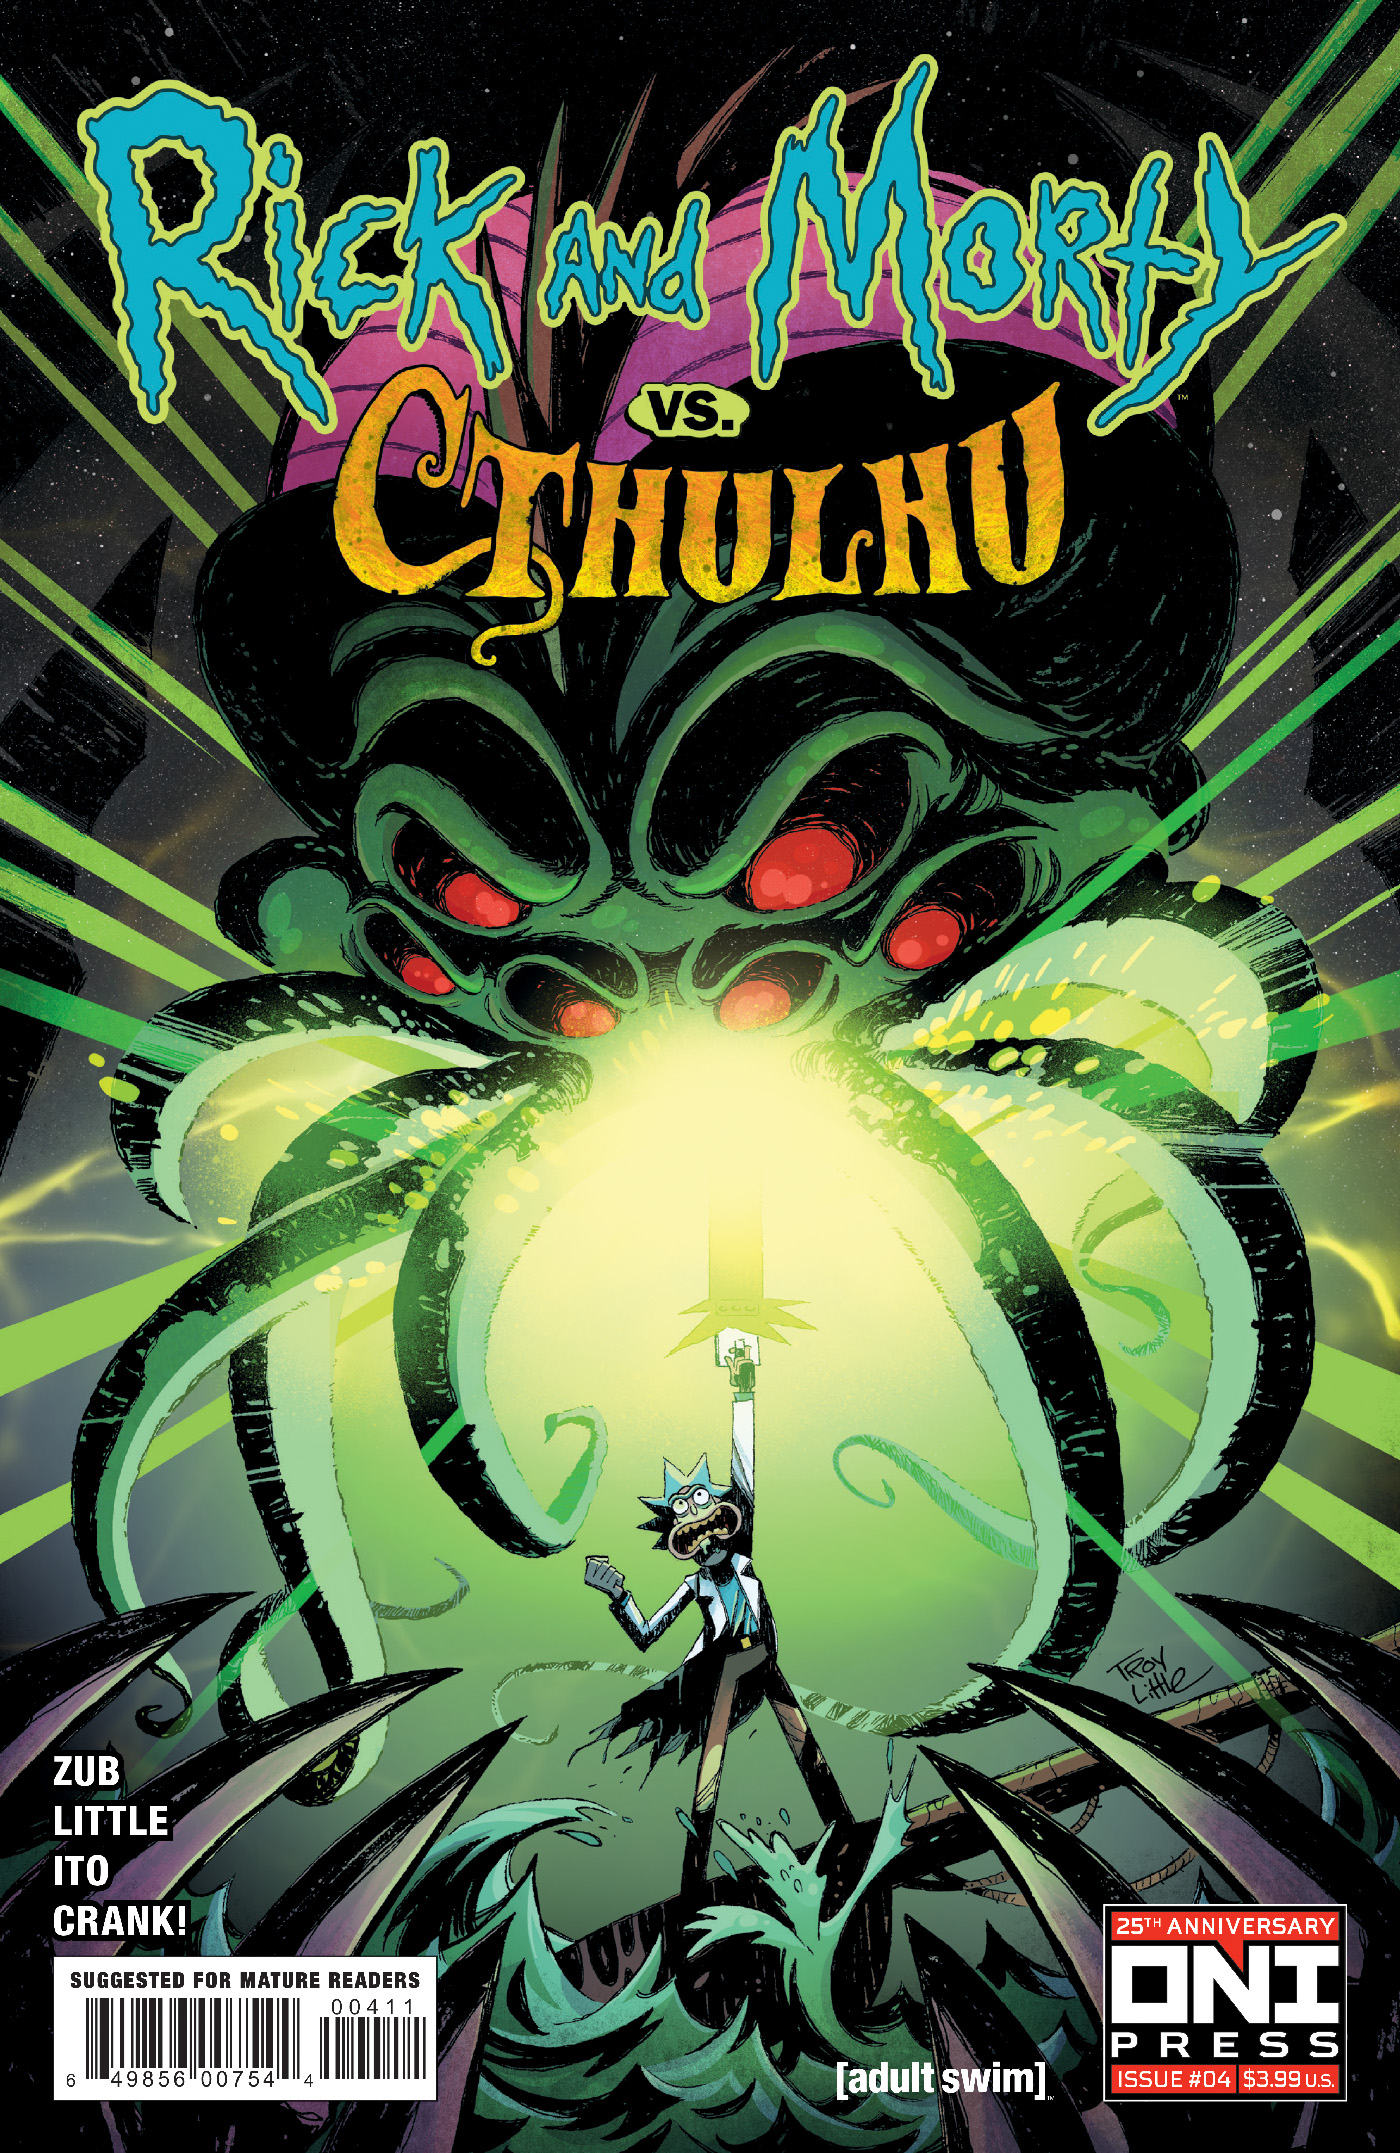 Rick And Morty Vs Cthulhu #4 Cover A Troy Little (Mature) (Of 4)